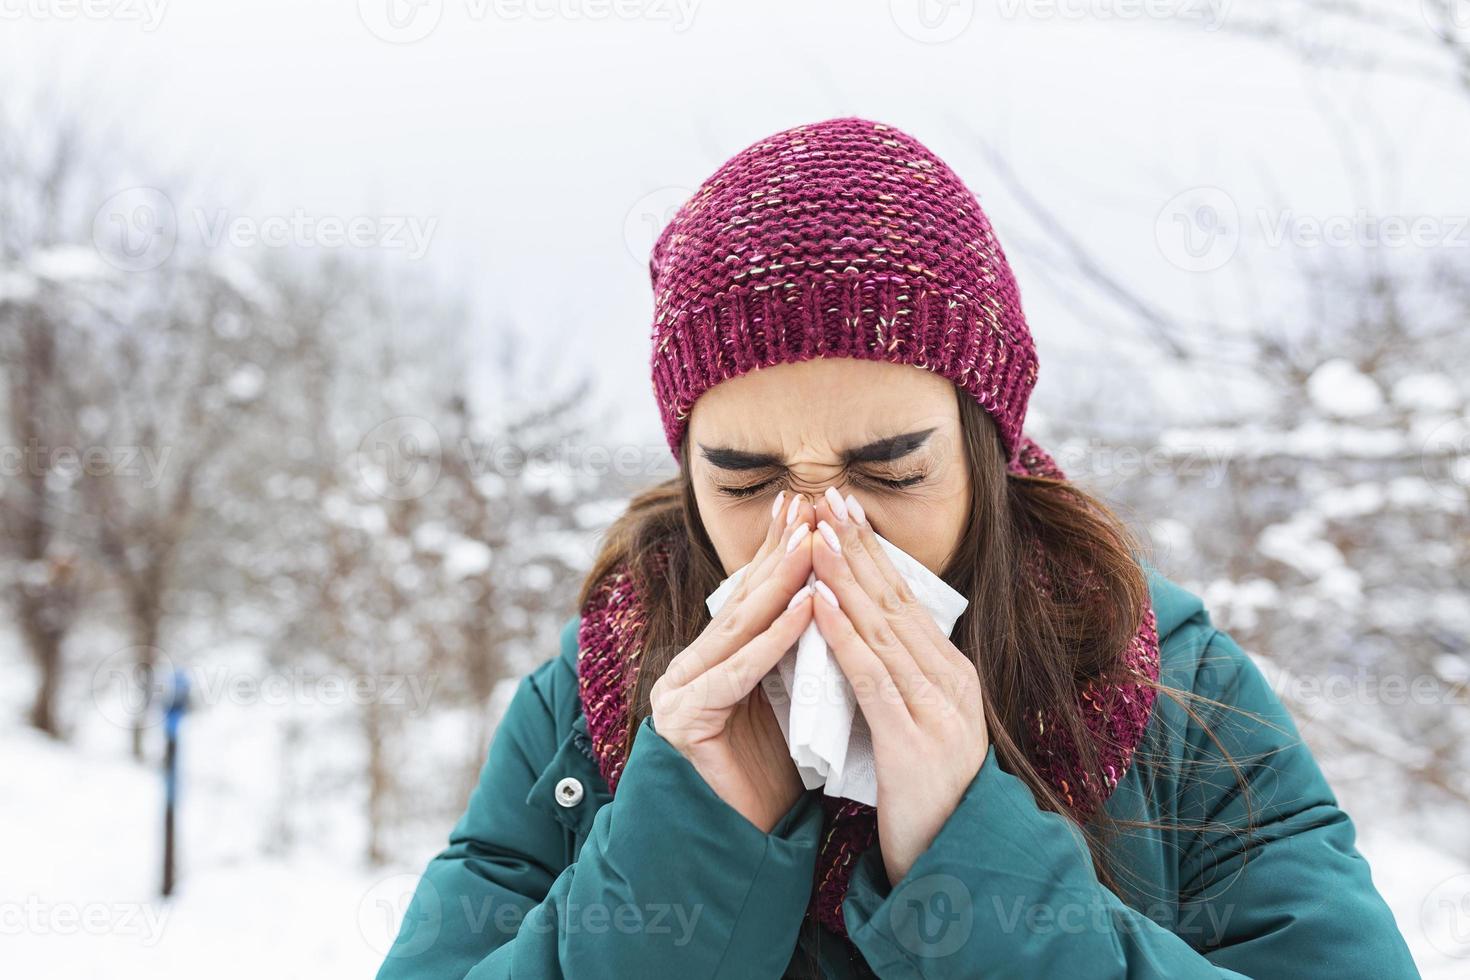 Young woman sick and sneeze into tissue paper. Girl blowing nose outdoors.Catching cold in winter. Upset gloomy woman with ill expression sneezes and has running nose photo